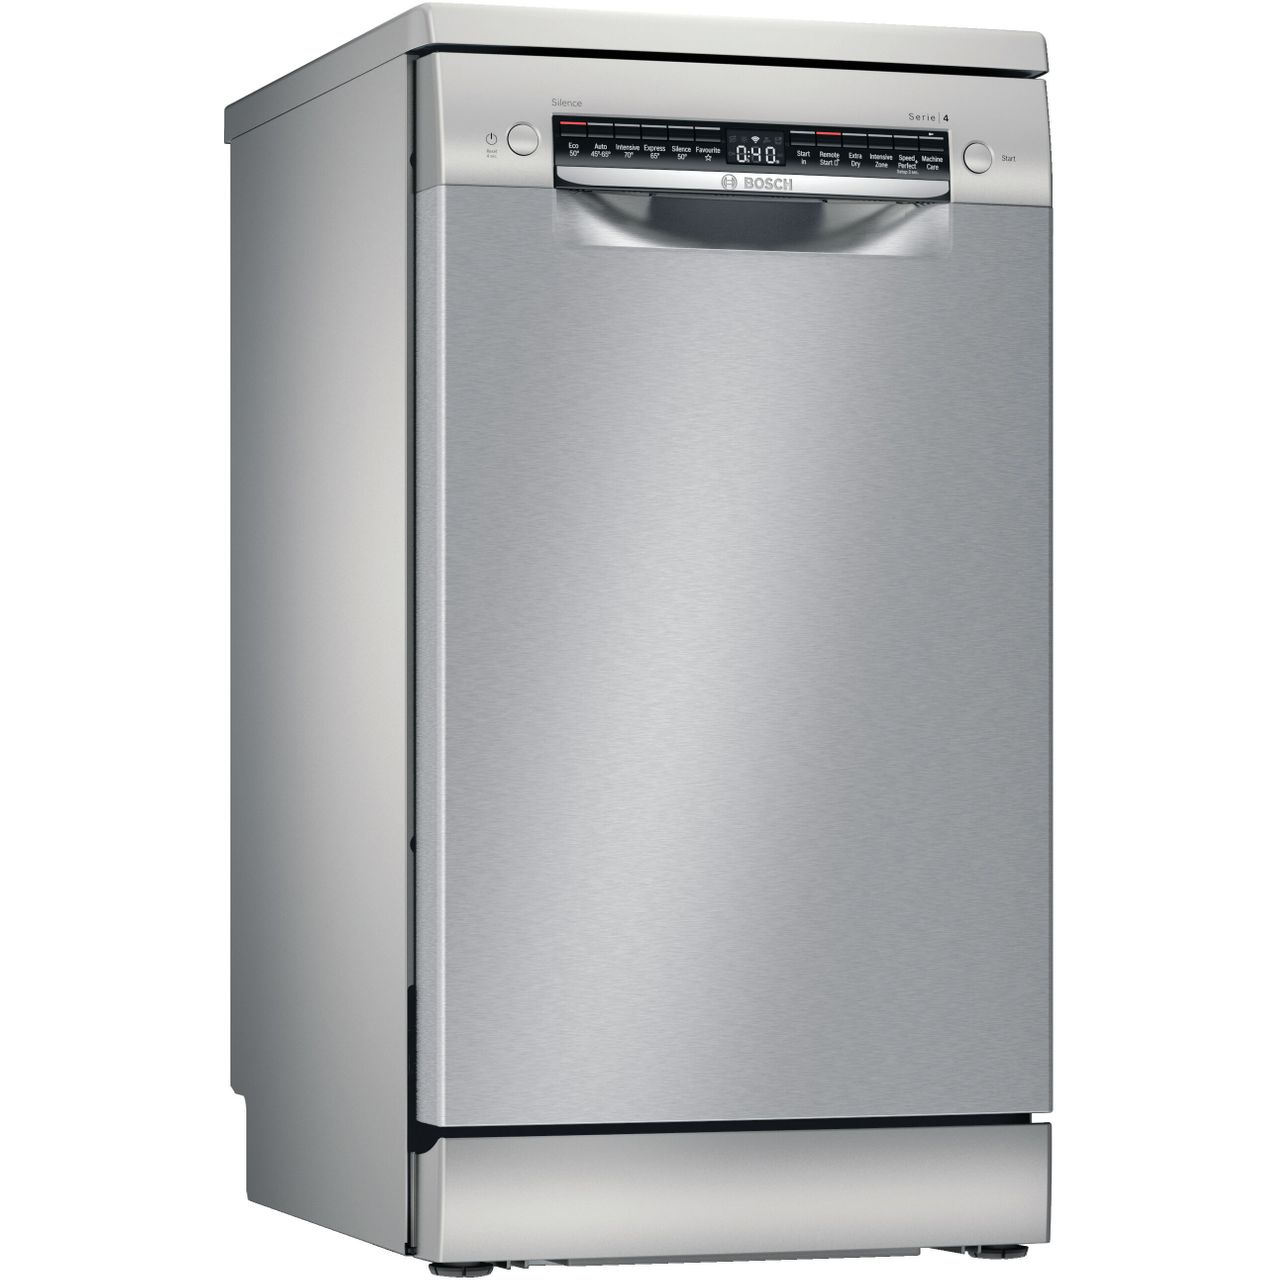 Bosch Serie 4 SPS4HKI45G Wifi Connected Slimline Dishwasher Review